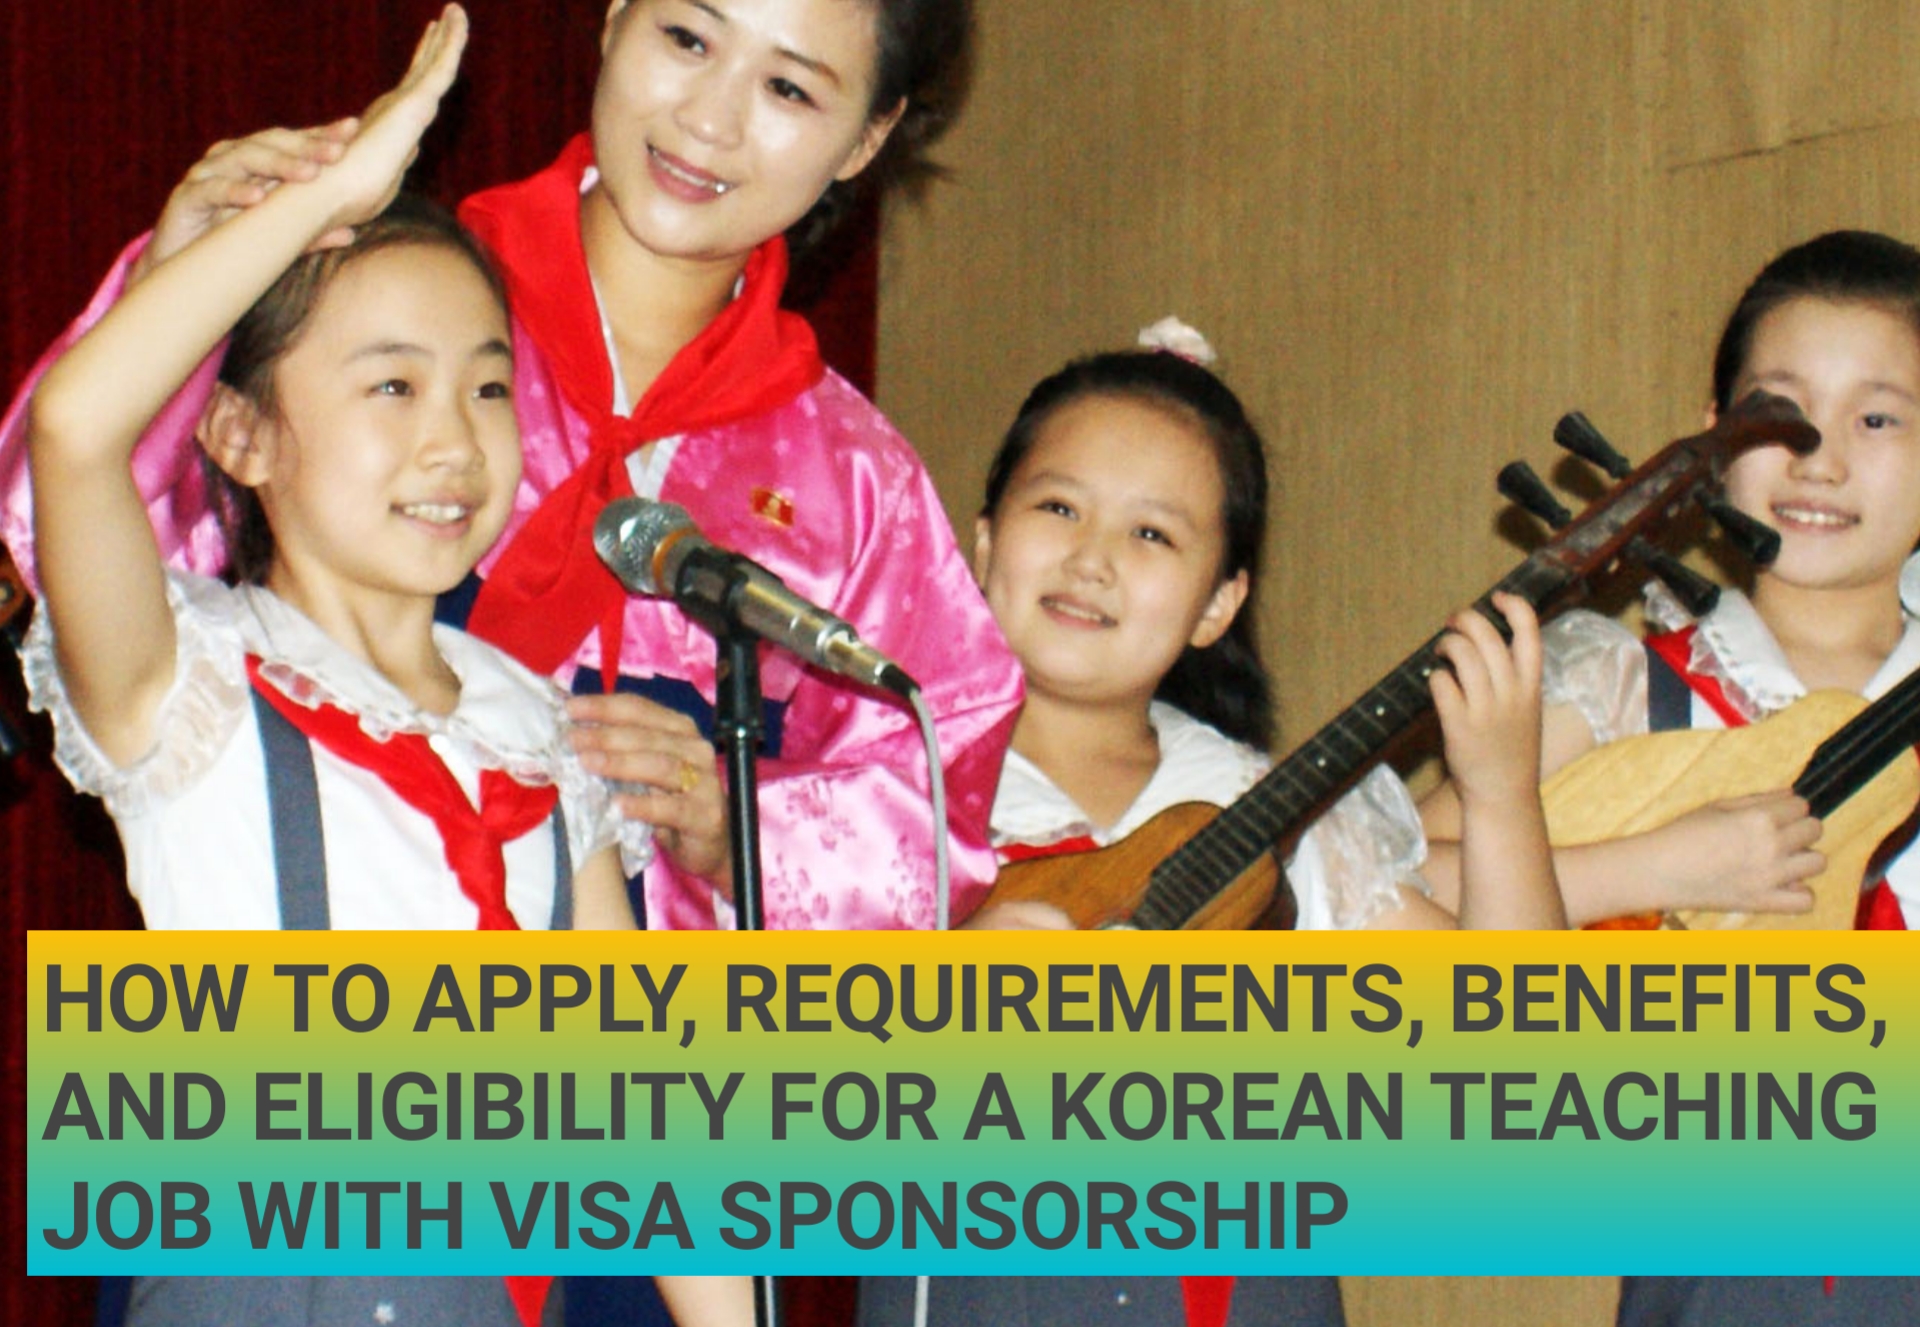 How to Apply, Requirements, Benefits, and Eligibility for a Korean Teaching Job with Visa Sponsorship